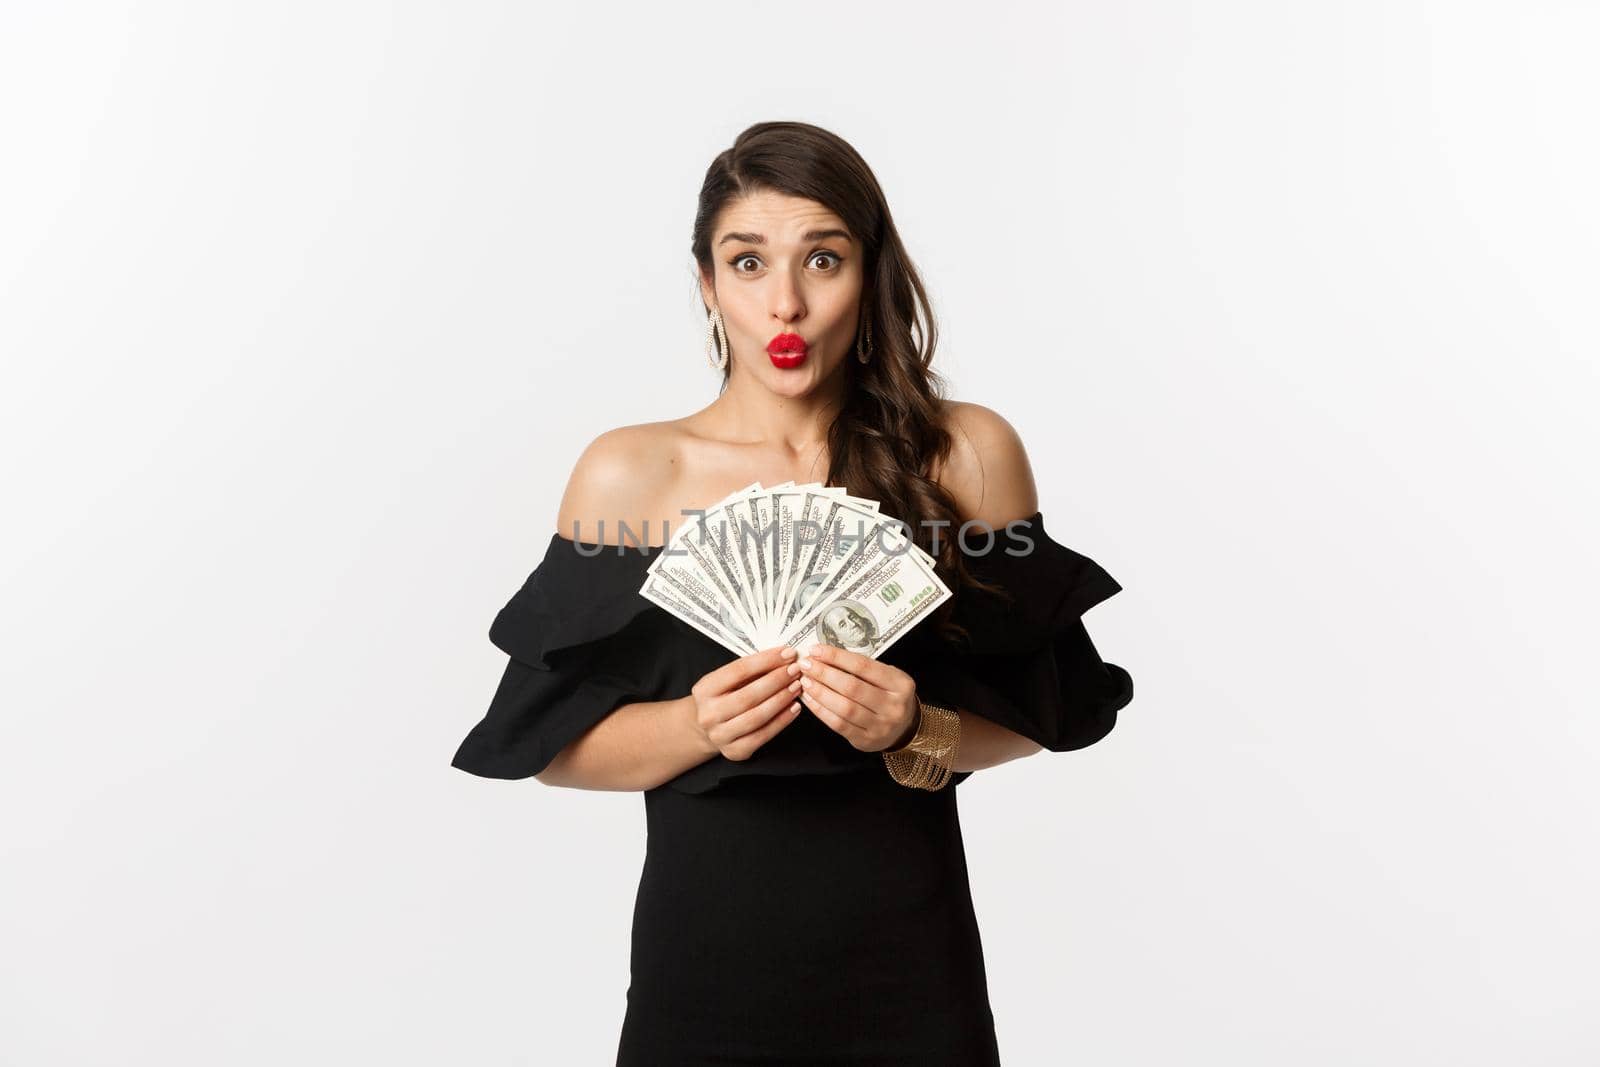 Fashion and shopping concept. Excited woman in black dress, with red lips, showing money dollars and looking amazed at camera, white background.